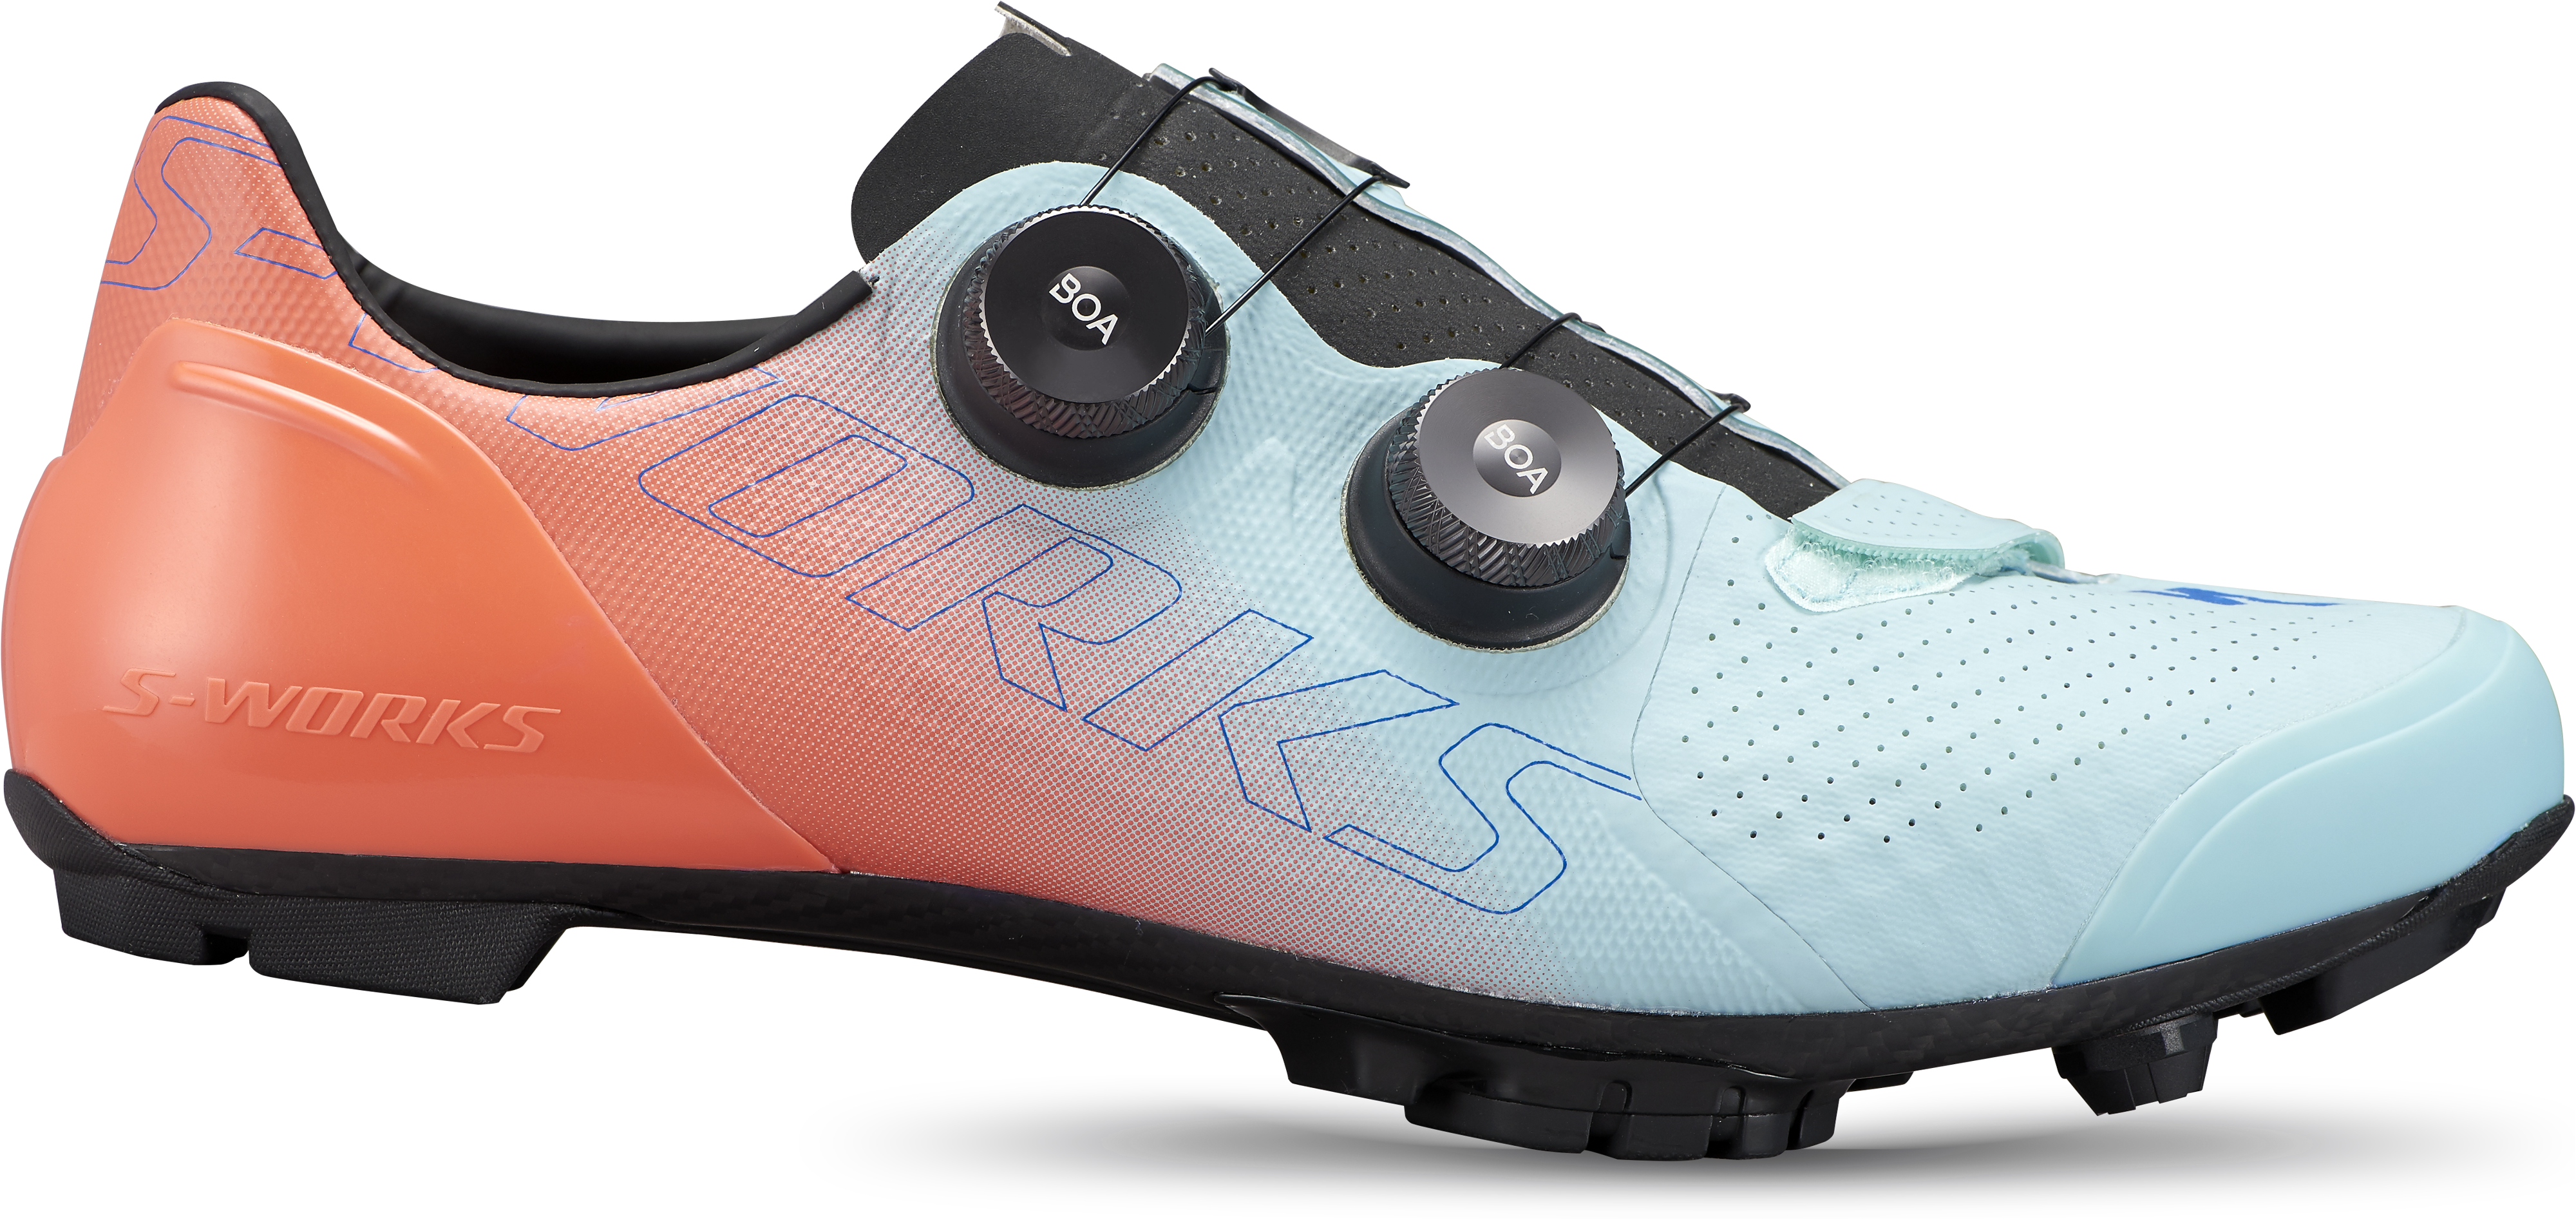 S-WORKS RECON MOUNTAIN BIKE SHOES